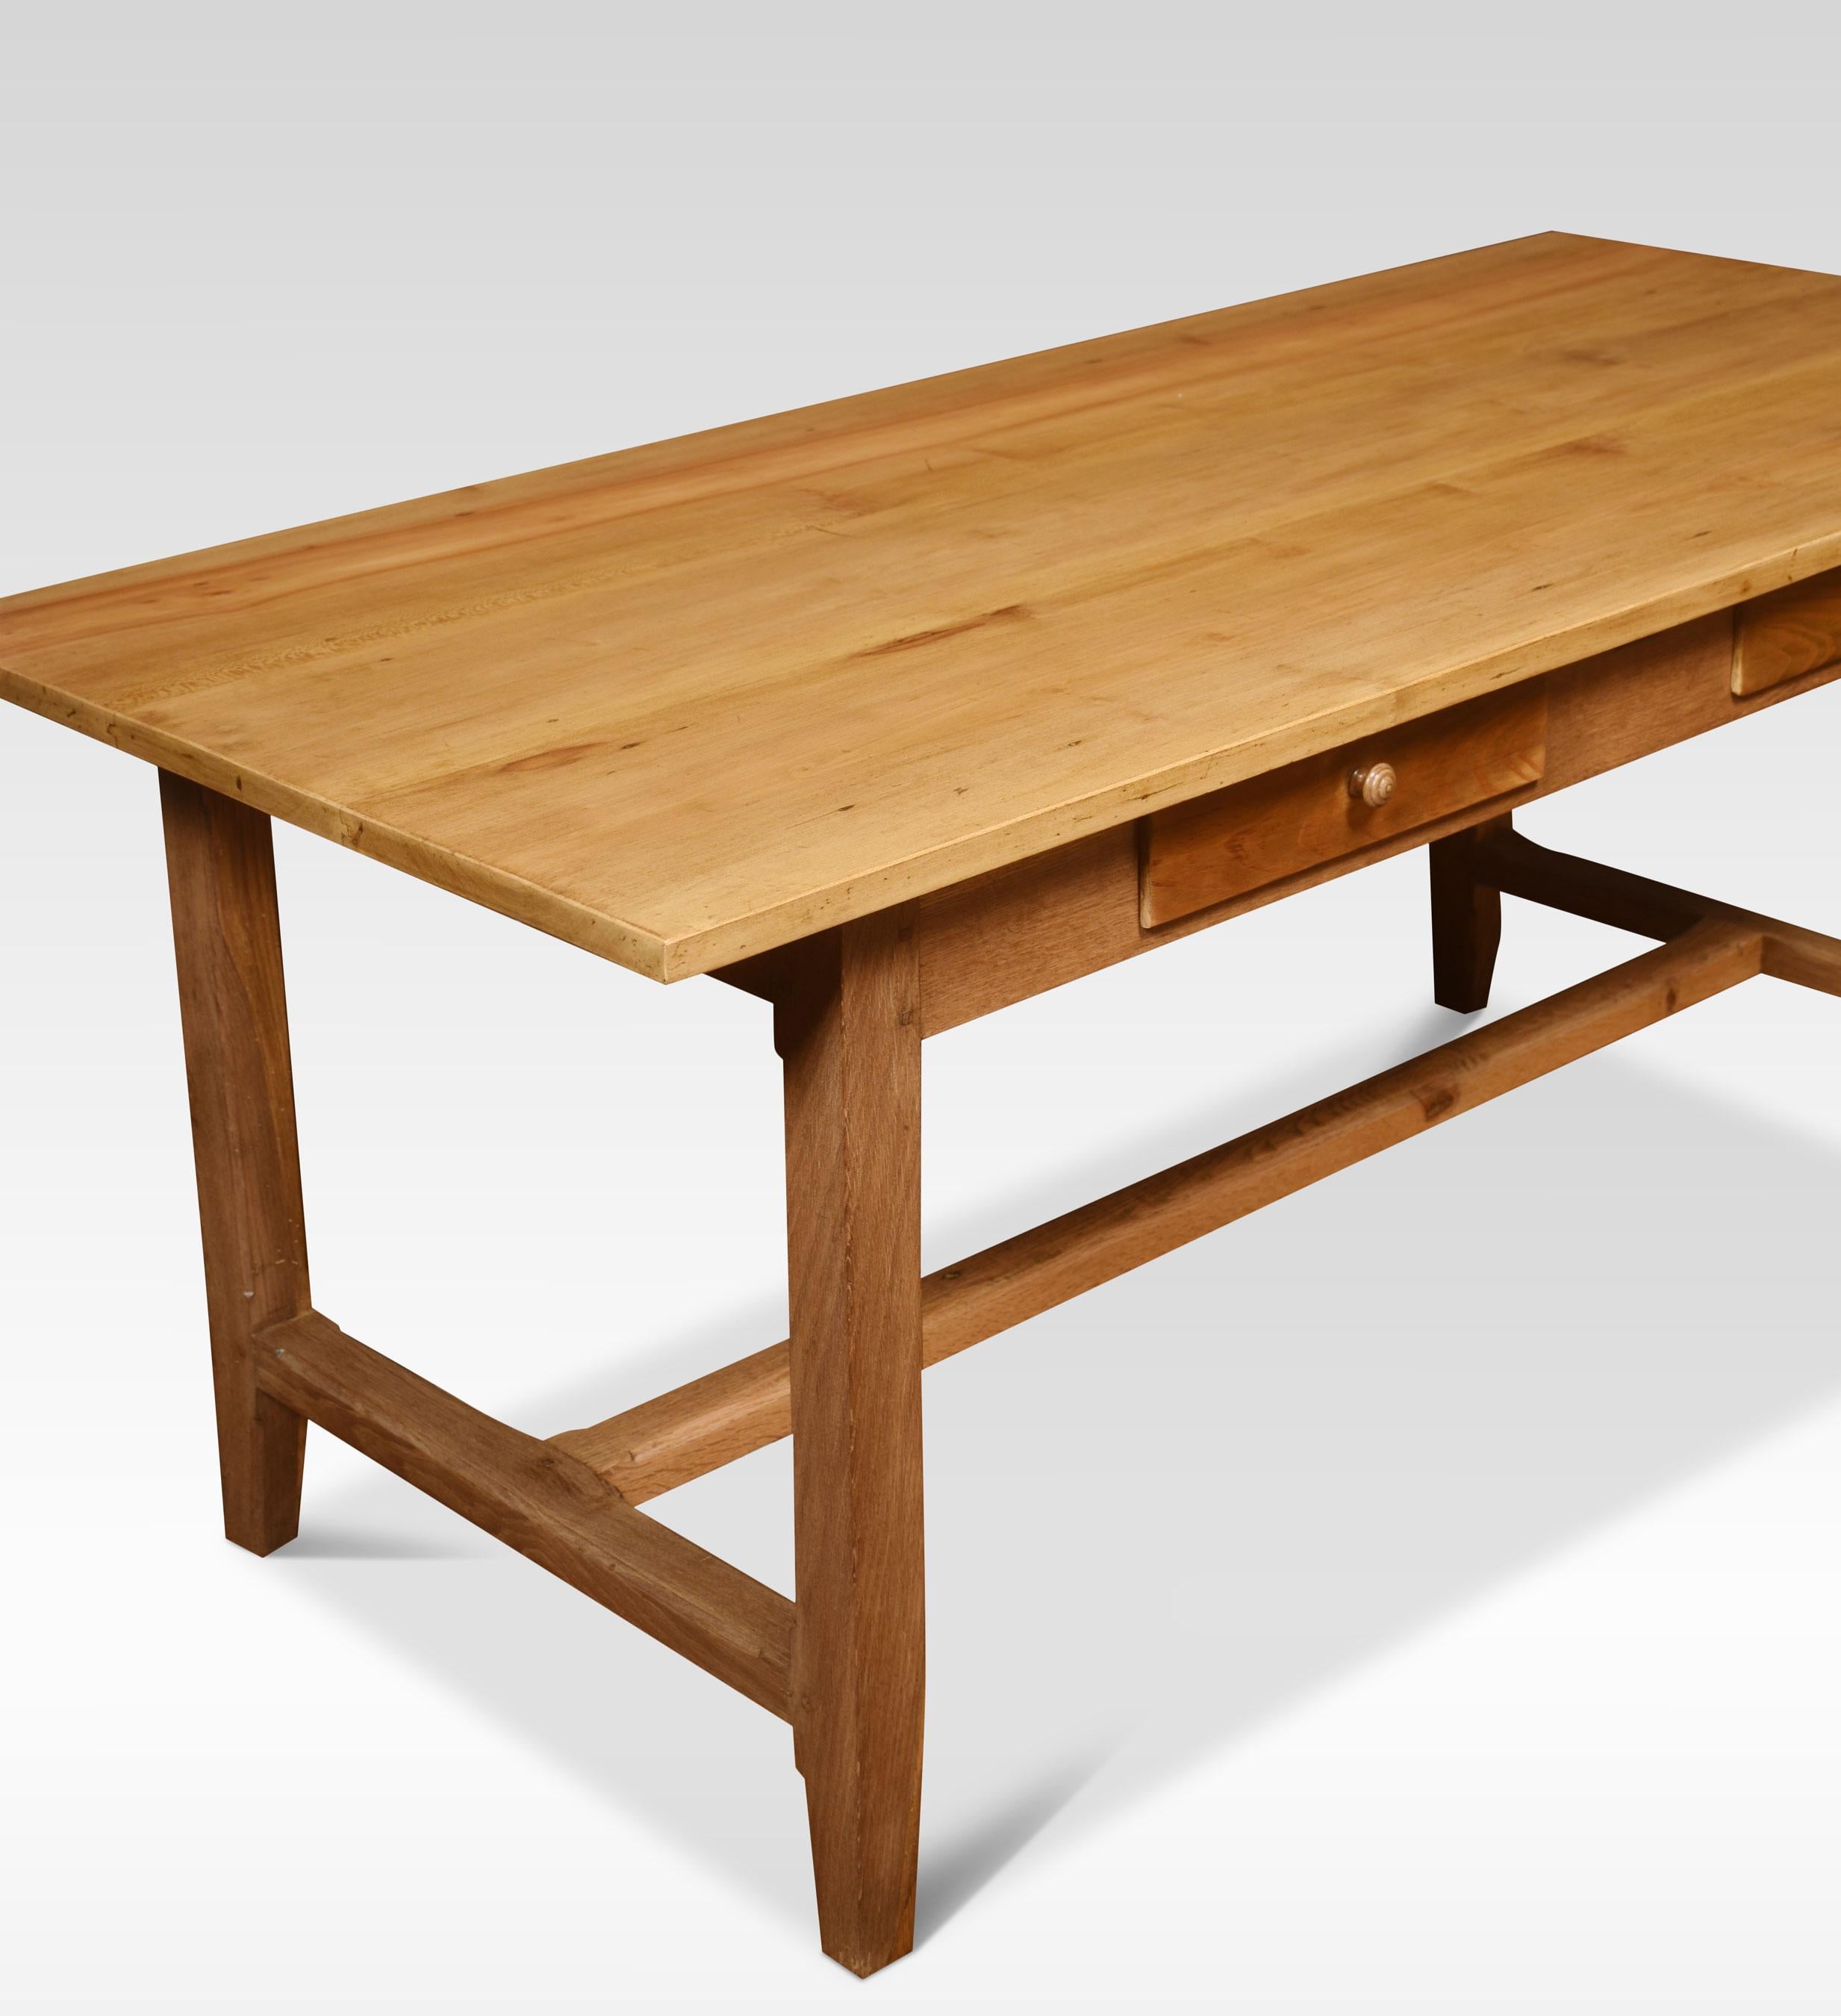 Large kitchen dining refectory table, the large rectangular top above a shallow frieze fitted with two drawers. All raised up on four square tapered legs united by stretcher.
Dimensions
Height 29 inches
Width 69 inches
Depth 31 inches.